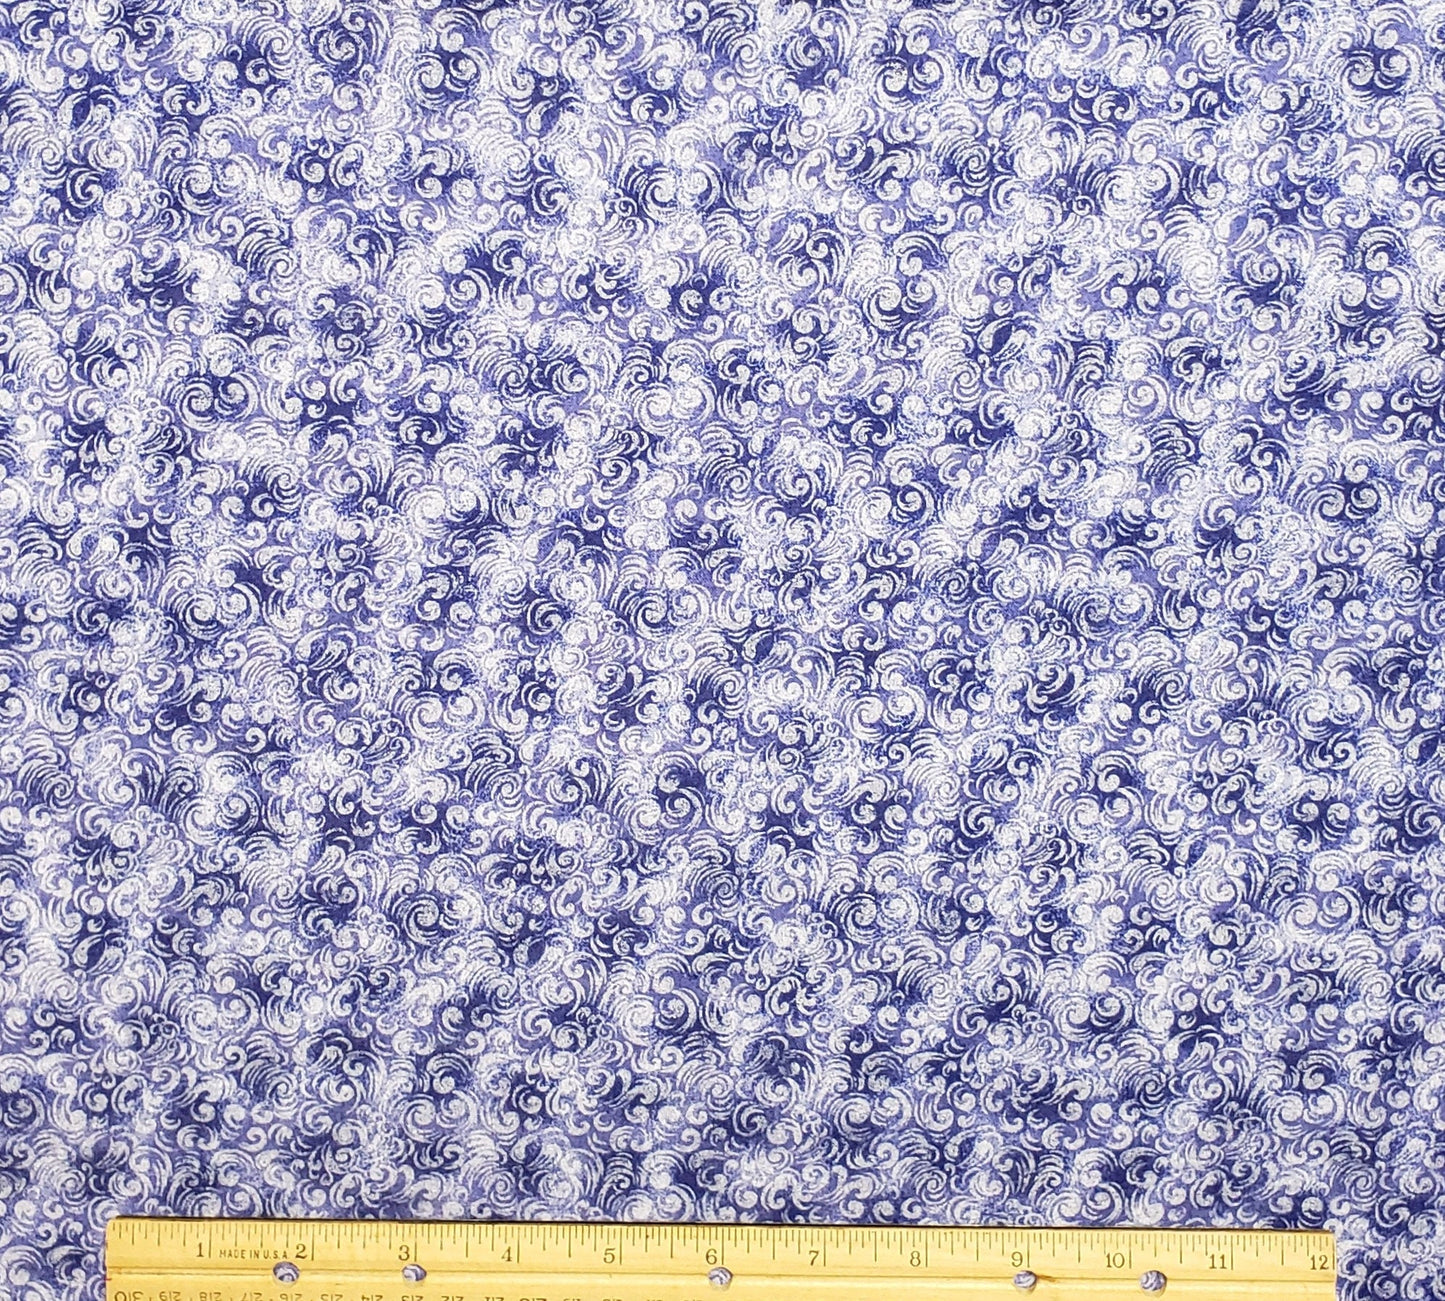 Medium Blue and Periwinkle Tonal Print Fabric - Selvage to Selvage Print